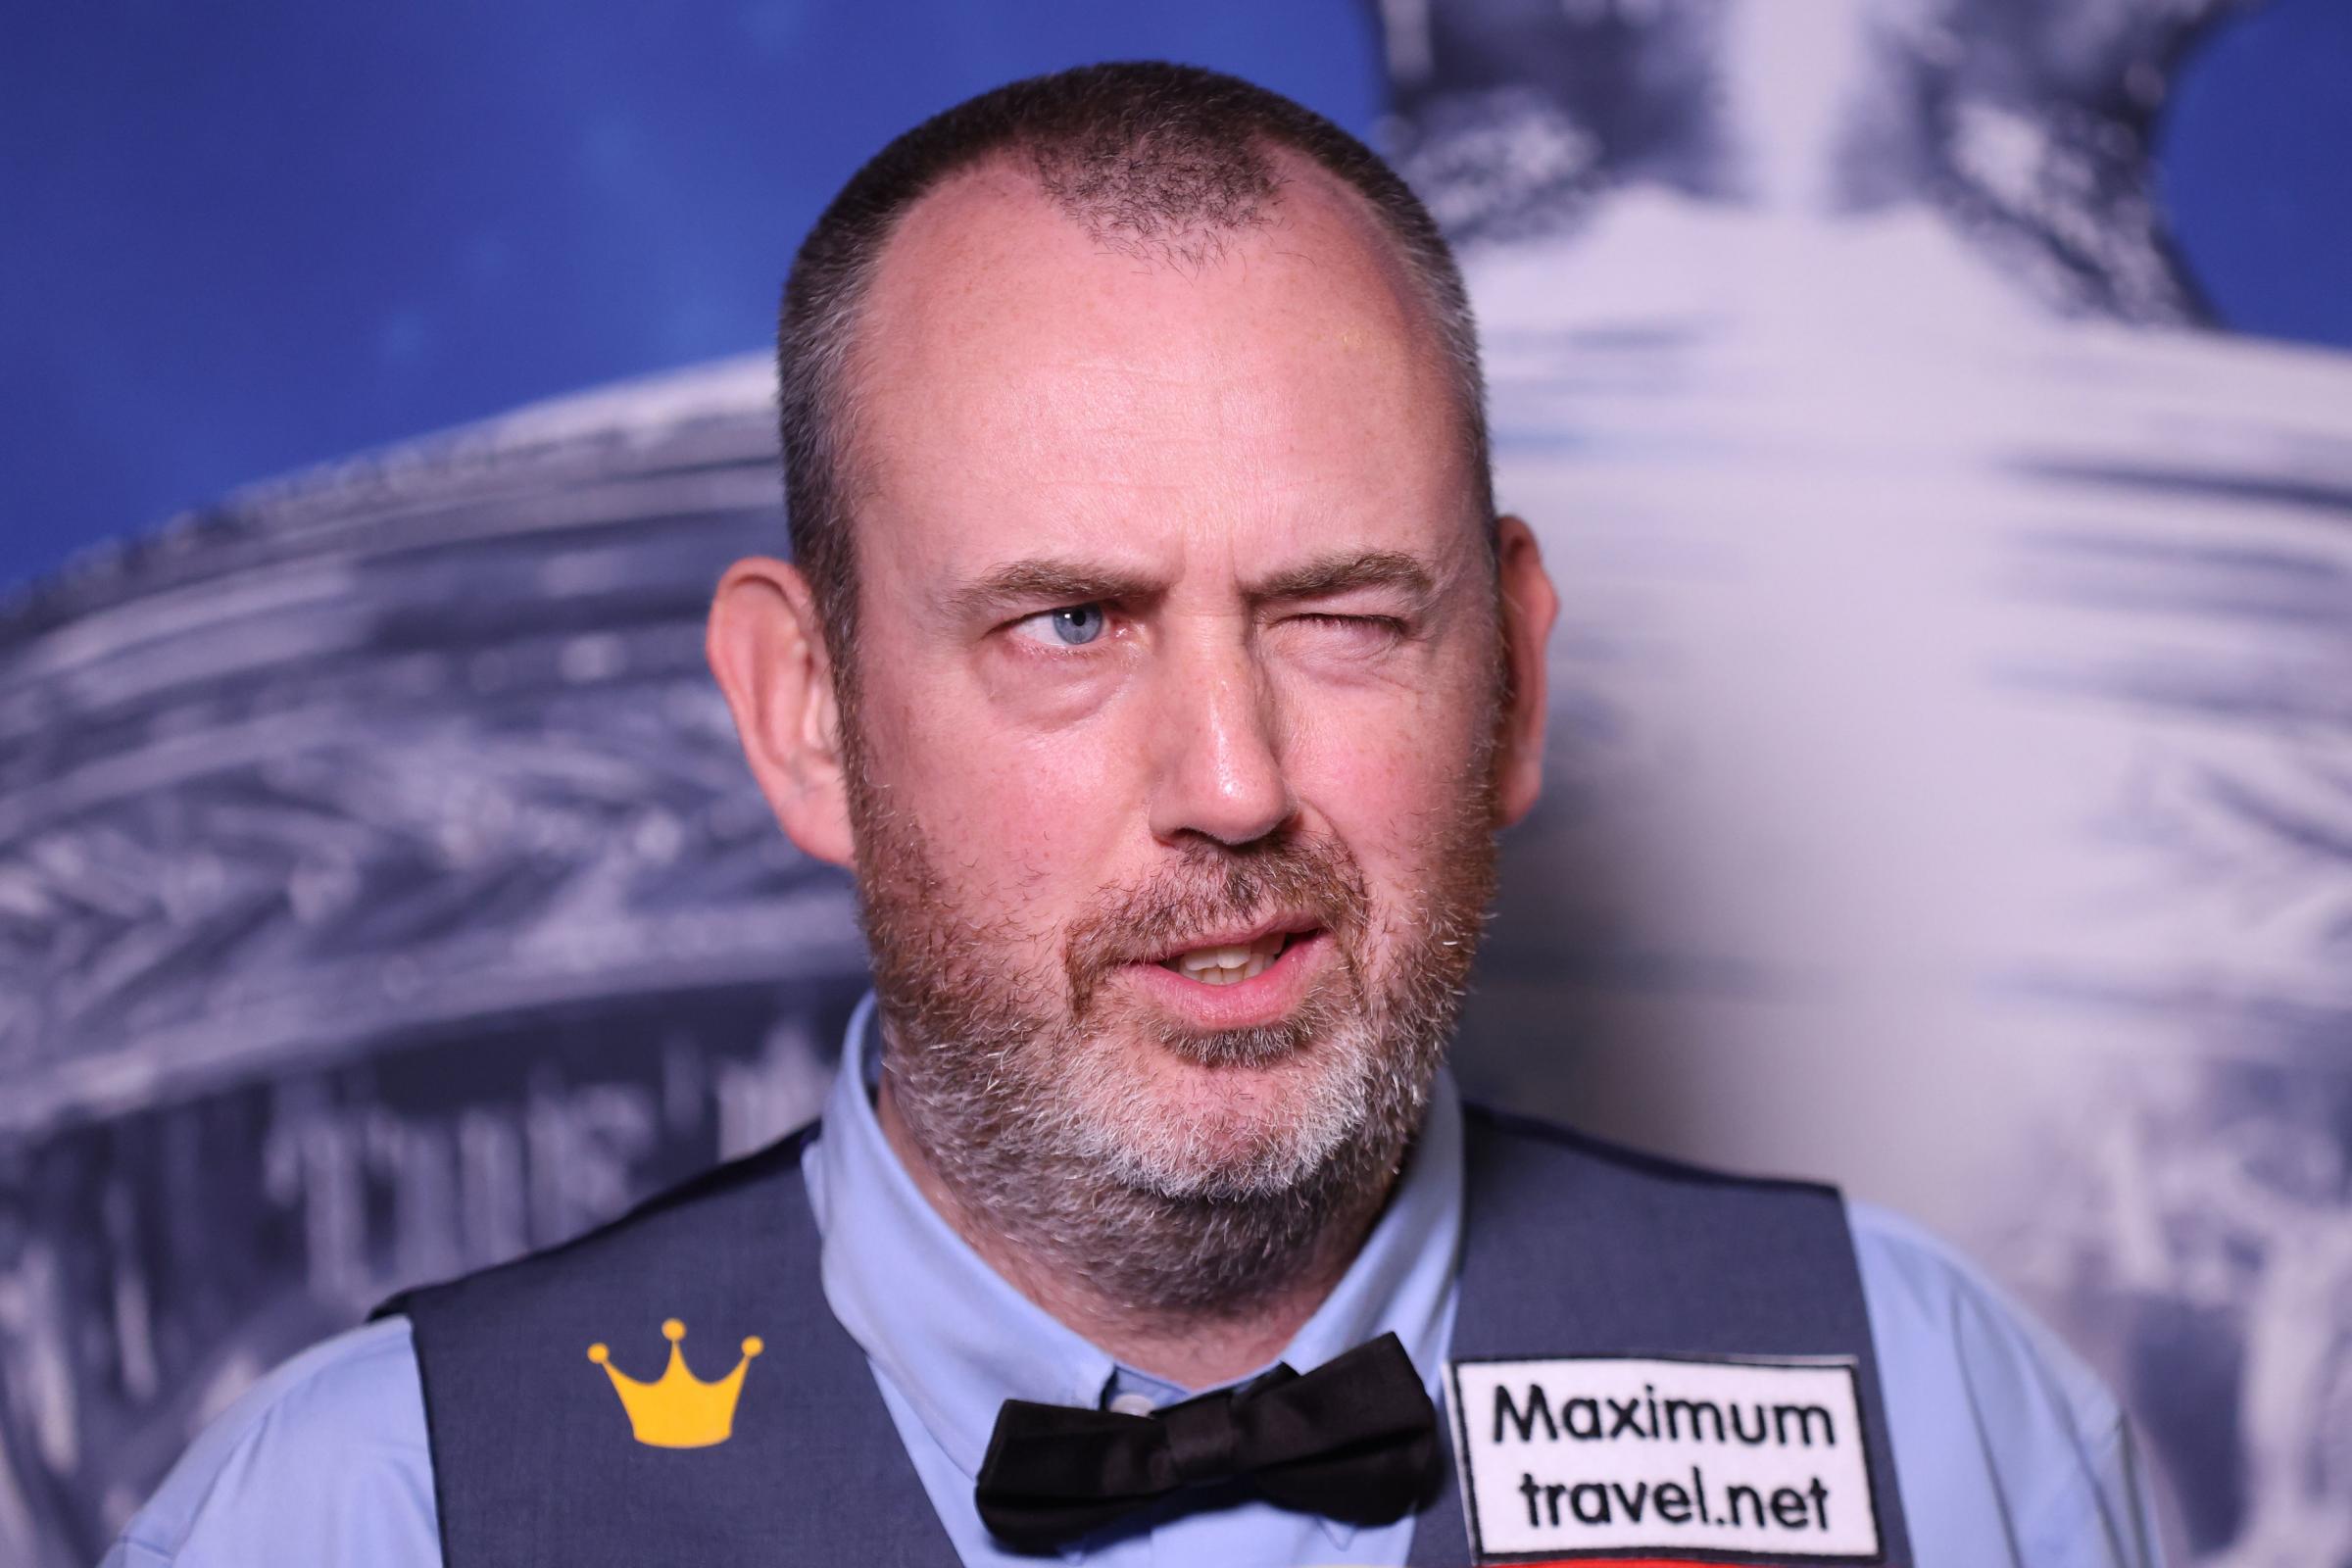 Mark Williams of Wales reacts during a TV interview following victory during day eight of the Betfred World Snooker Championships 2021 at The Crucible, Sheffield. Picture date: Saturday April 24, 2021. PA Photo. See PA story SNOOKER World. Photo credit